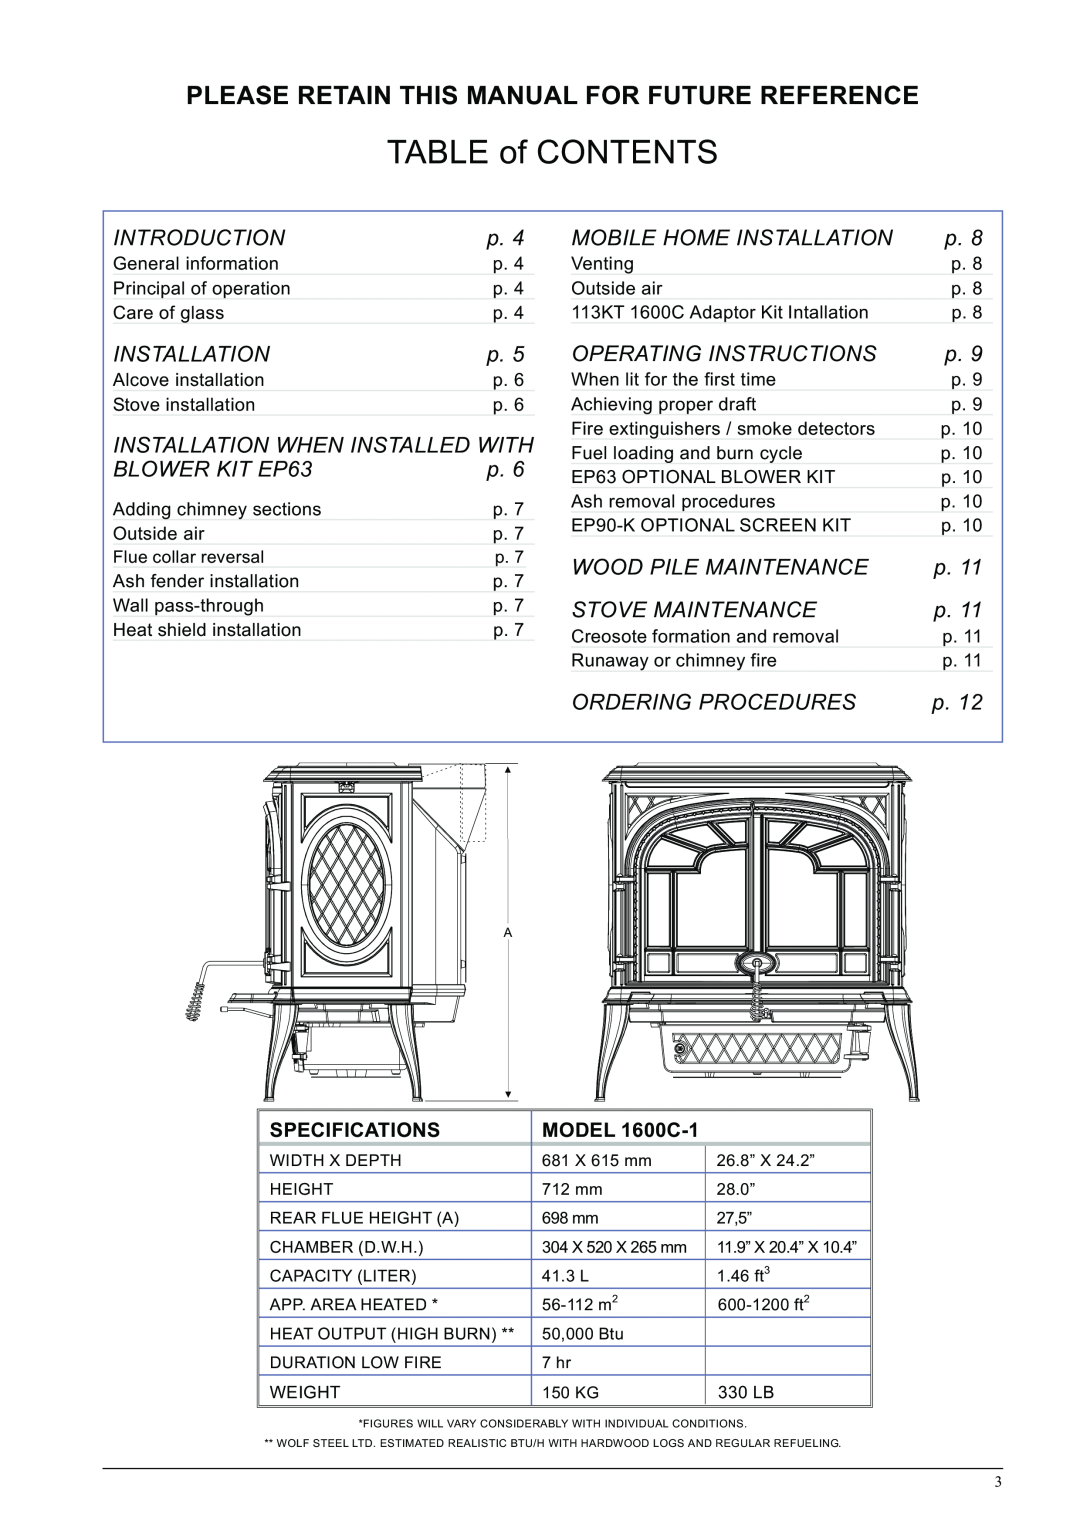 Napoleon Fireplaces 1600C-1 specifications TABLE of CONTENTS, Please Retain This Manual For Future Reference 